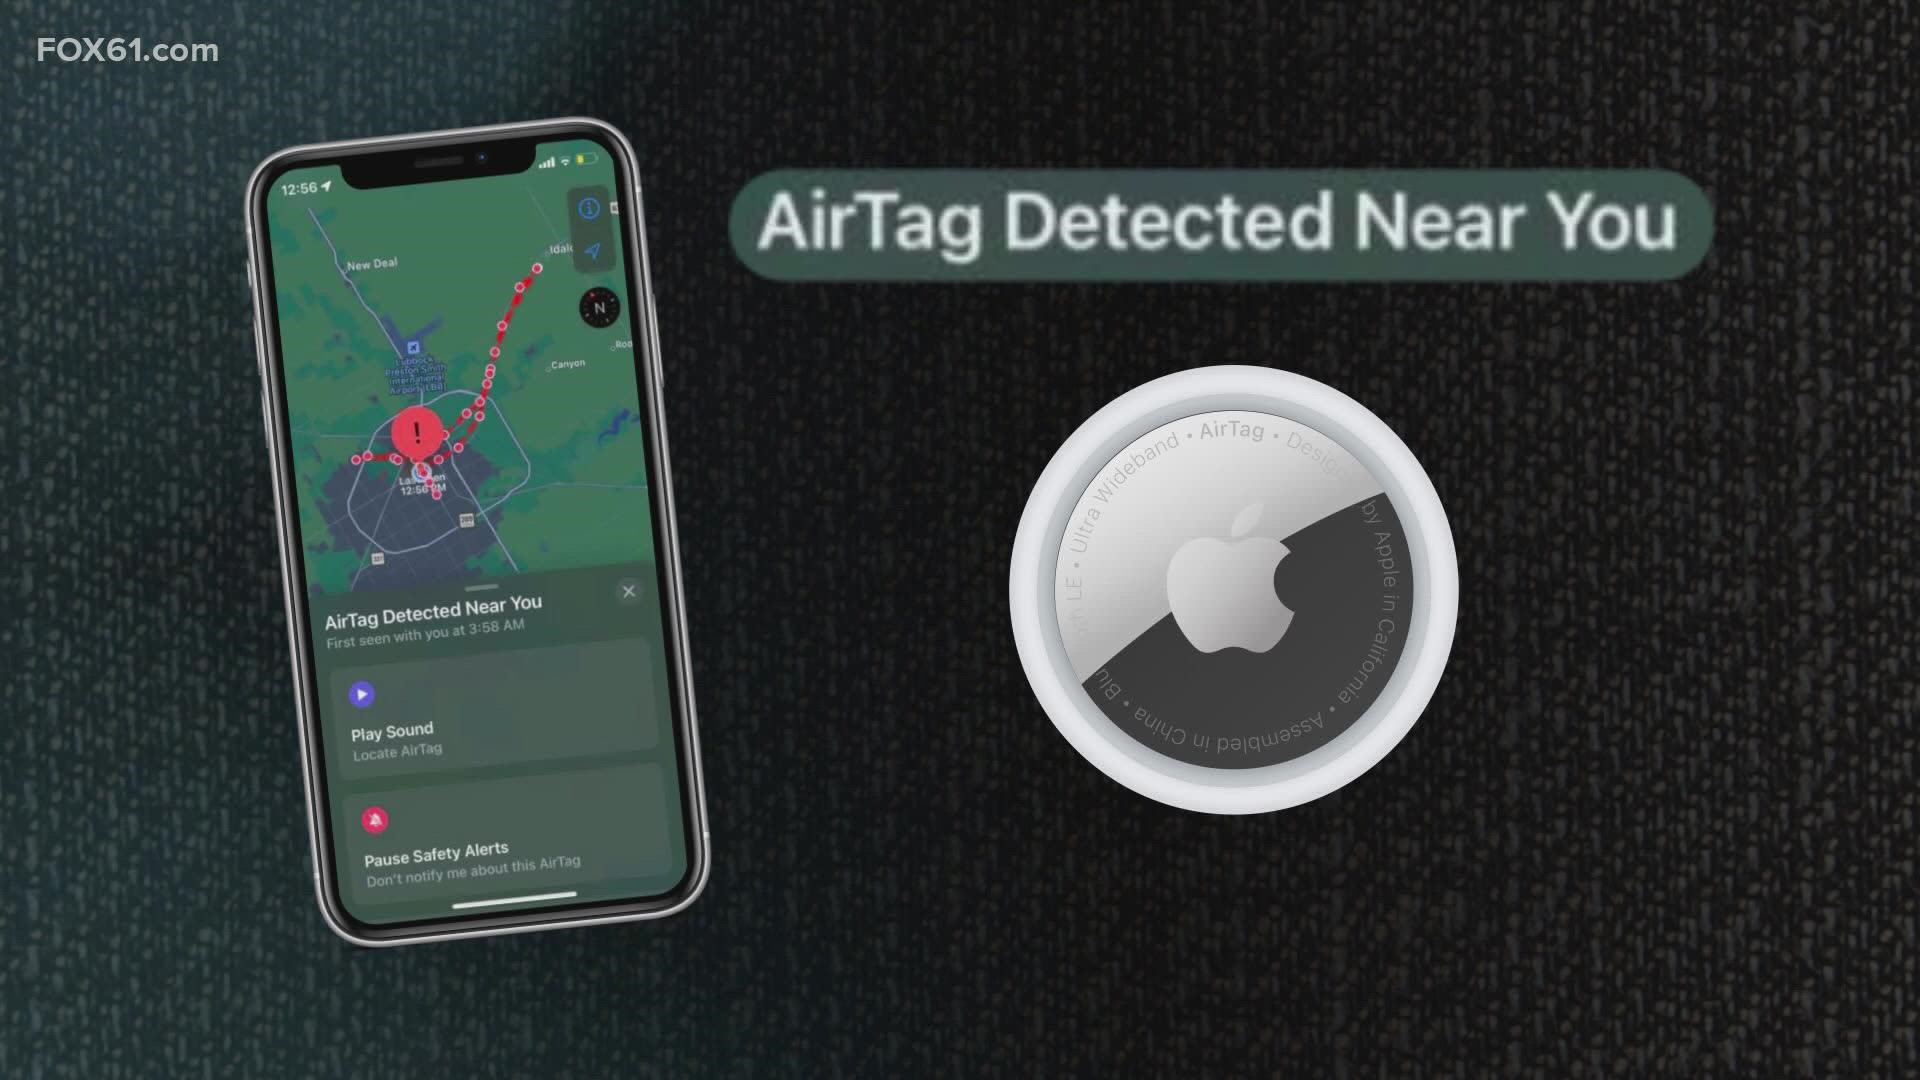 Apple to start warning AirTag users not to use devices to track people, Apple